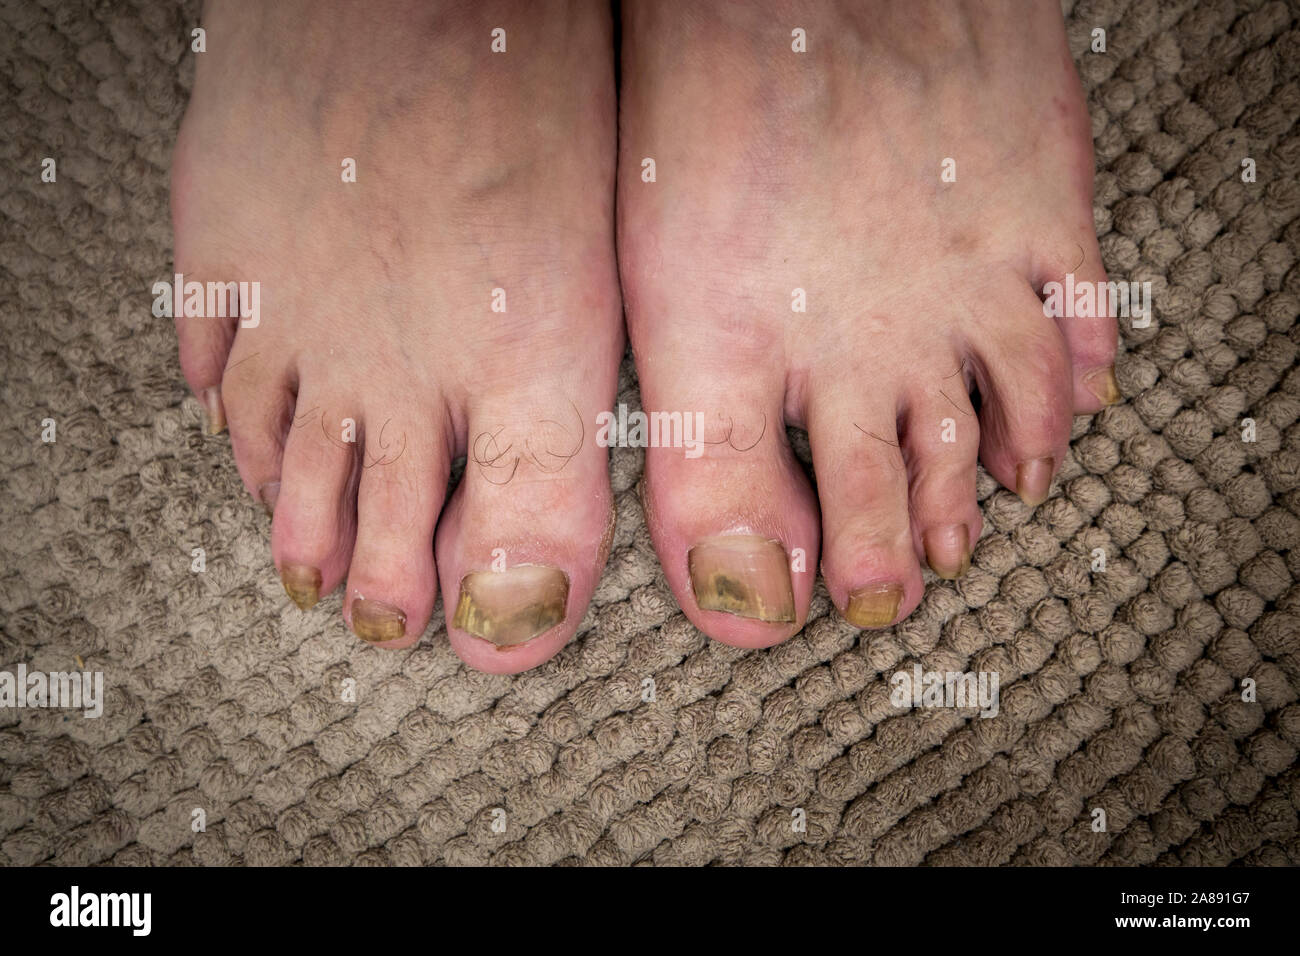 Onychomycosis with fungal nail infection two feet. Stock Photo